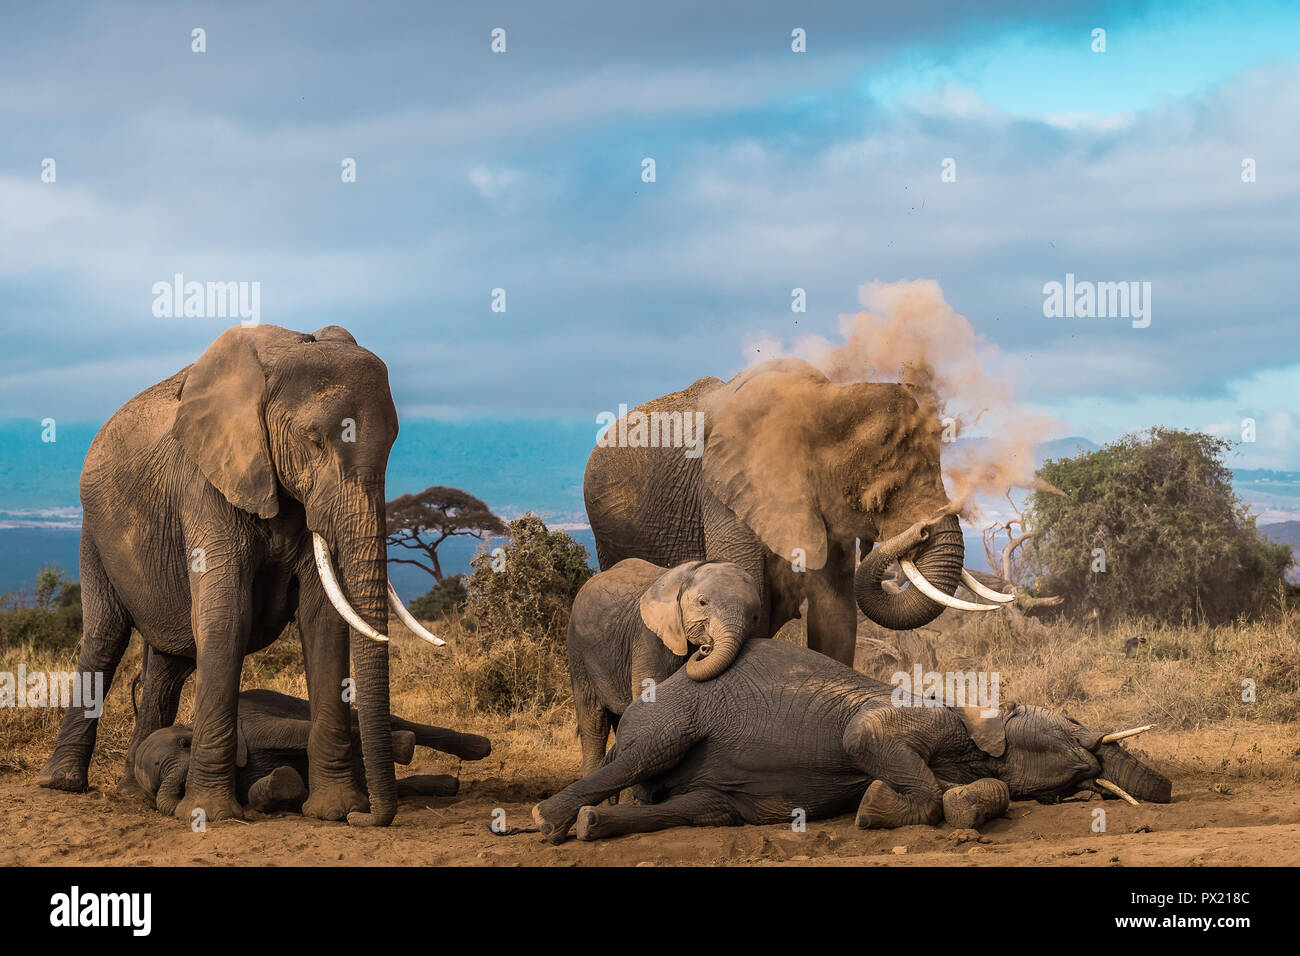 This image of Elephants taking a dust bath is taken at Amboseli National Park in Kenya. Stock Photo